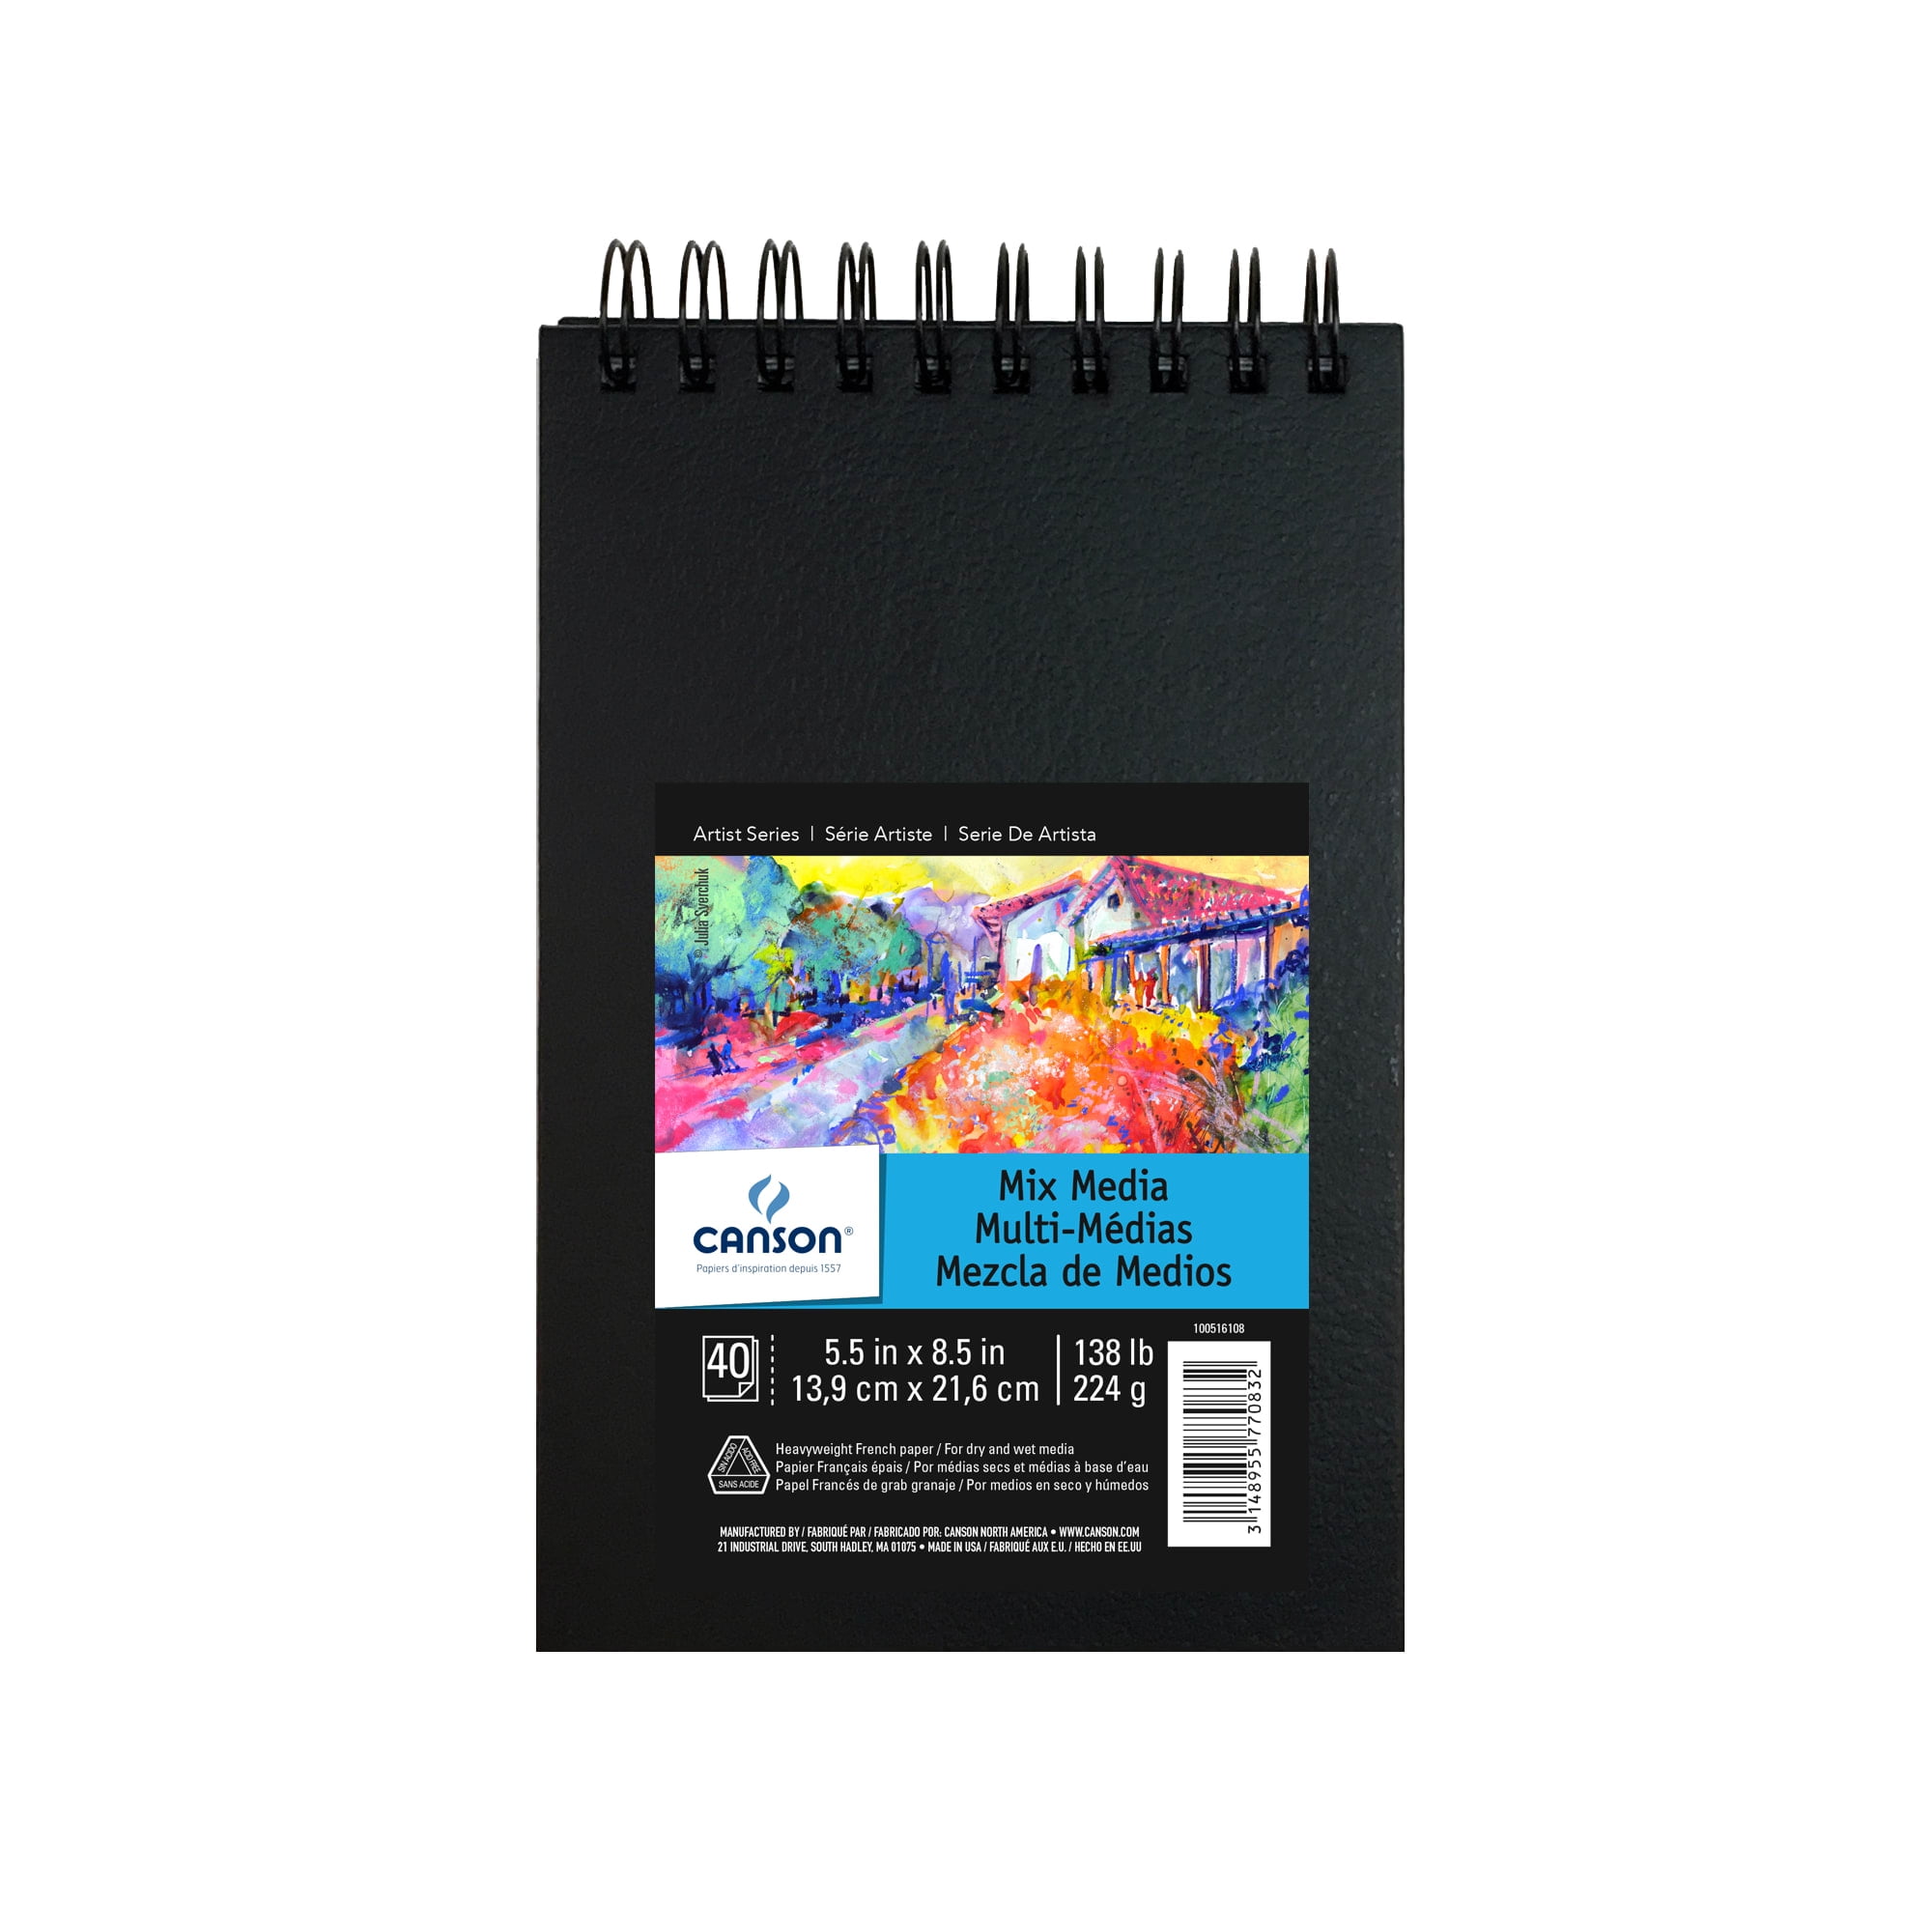 Canson Artist Series Sketch Book, Hardbound, 5.5x8.5 inches, 108 Sheets -  Lay Flat Art Notebook